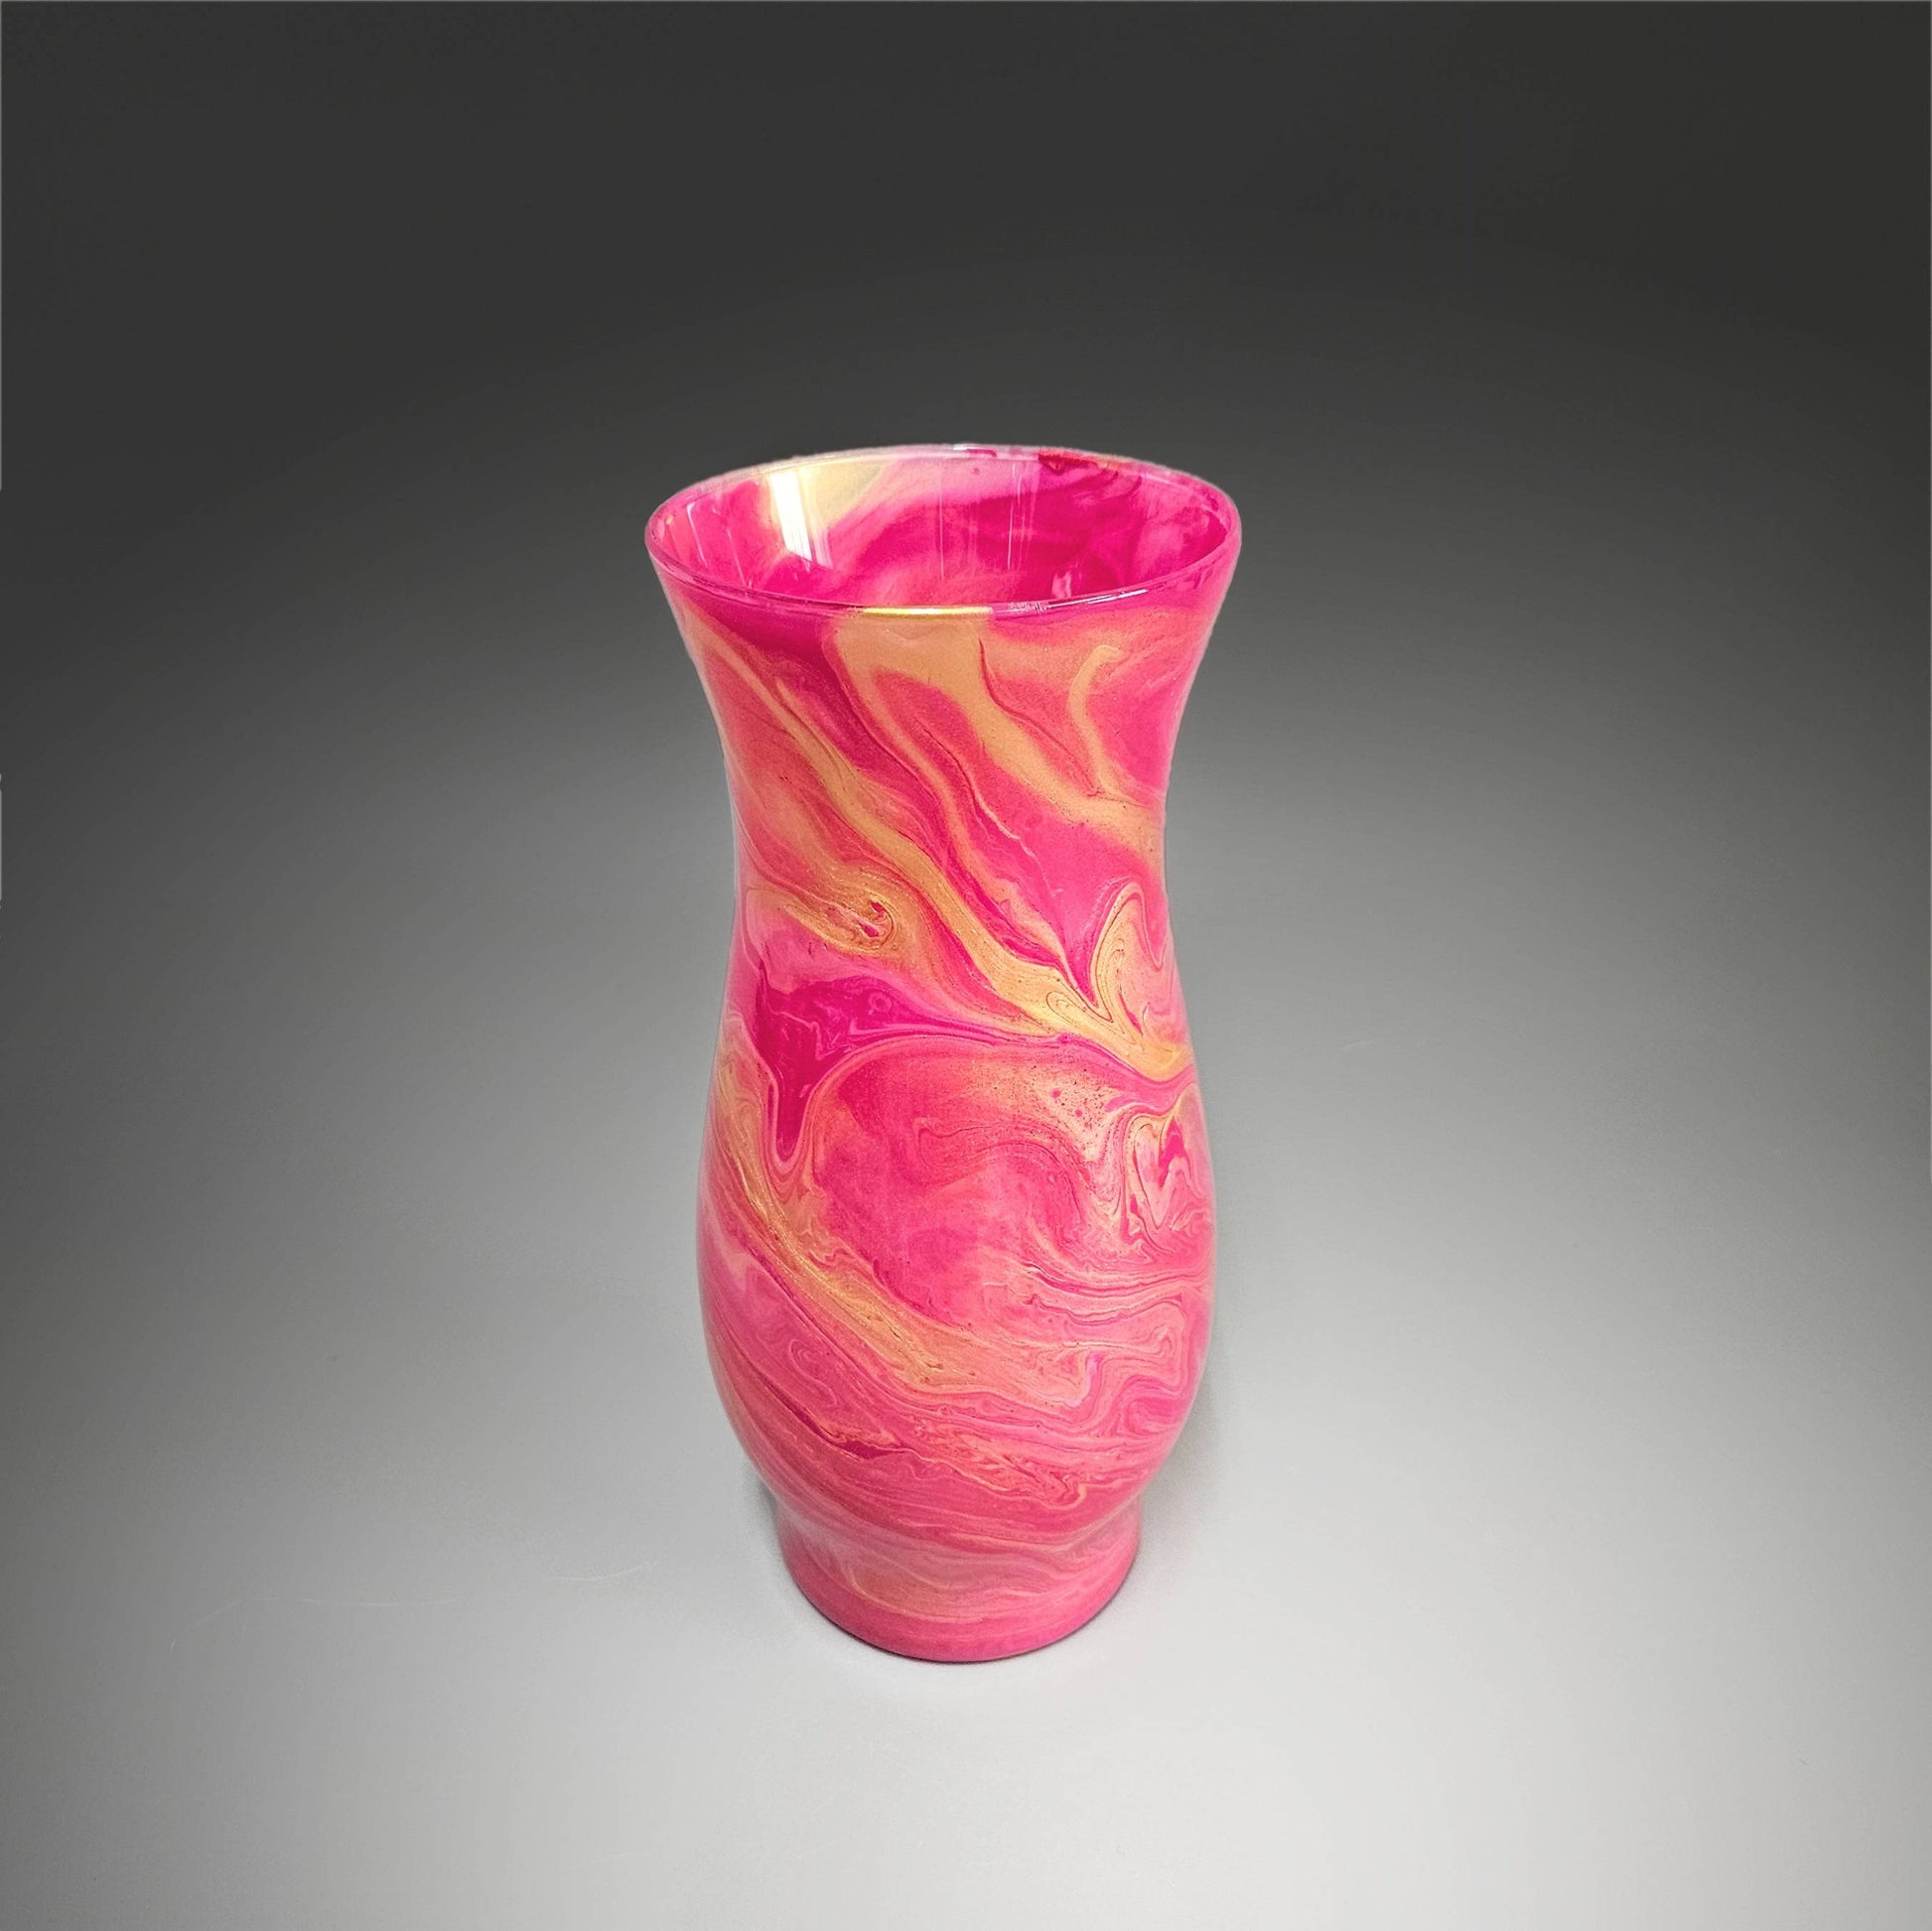 Painted Vase in Pink and Gold | Fluid Art Gifts and Home Décor